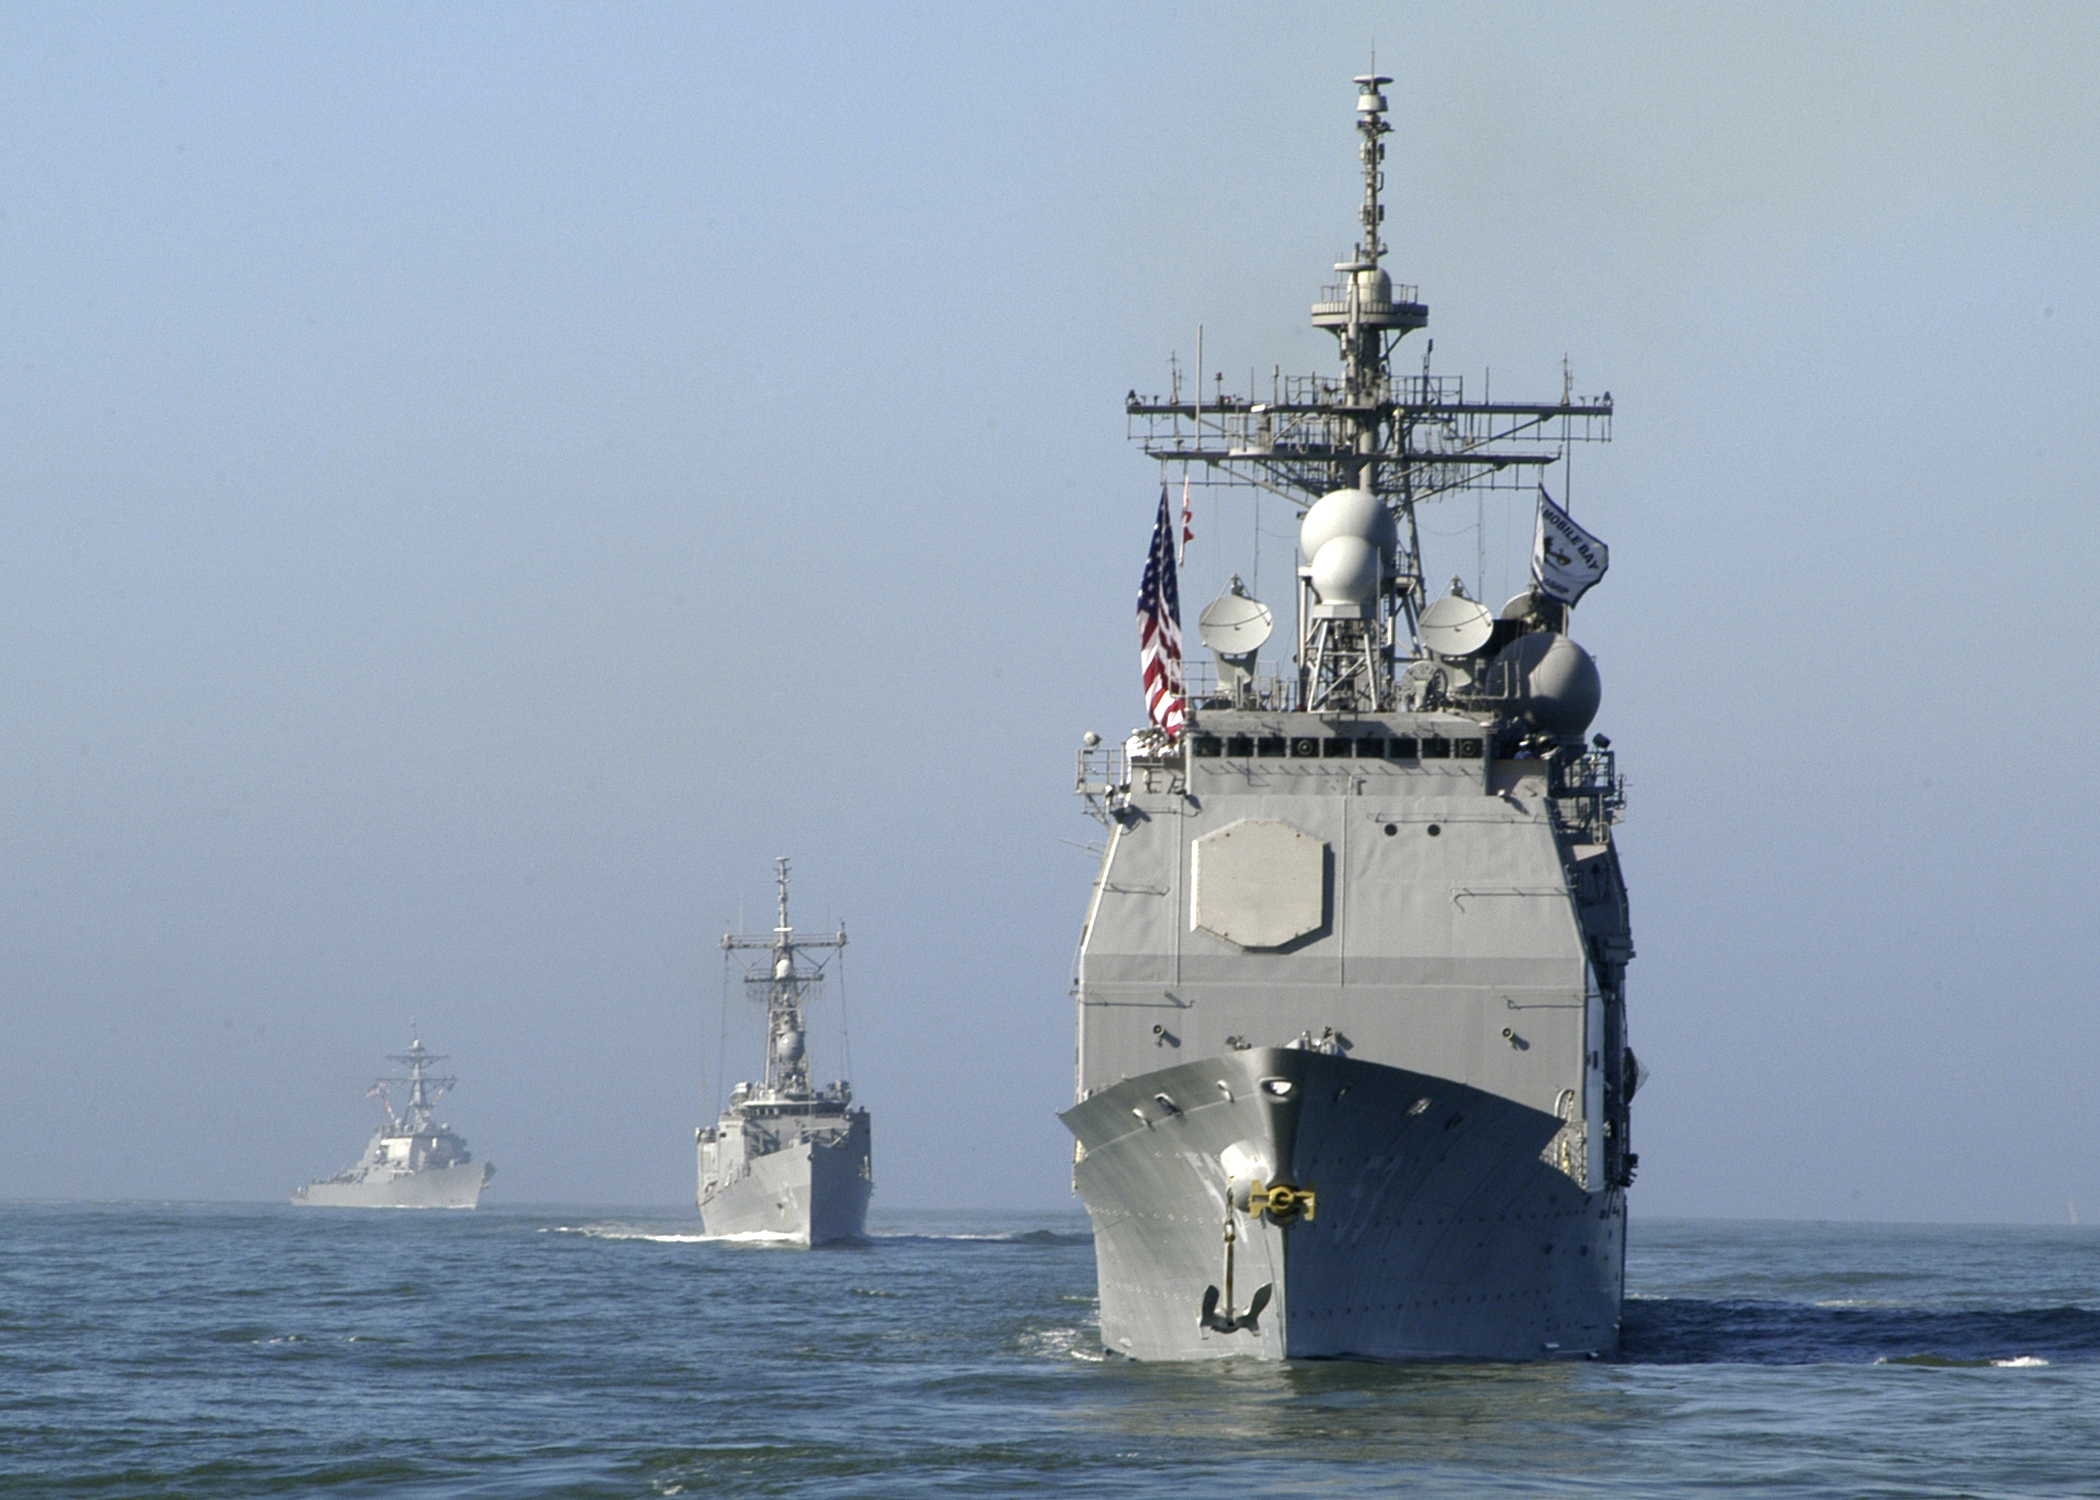 US_Navy_031011-N-9214D-018_USS_Mobile_Bay_%28CG_53%29_and_other_U.S._Navy_and_Coast_Guard_Ships_line_up_in_formation_to_parade_across_San_Francisco_Bay_and_commence_Navy_Fleet_Week_2003_festivities.jpg